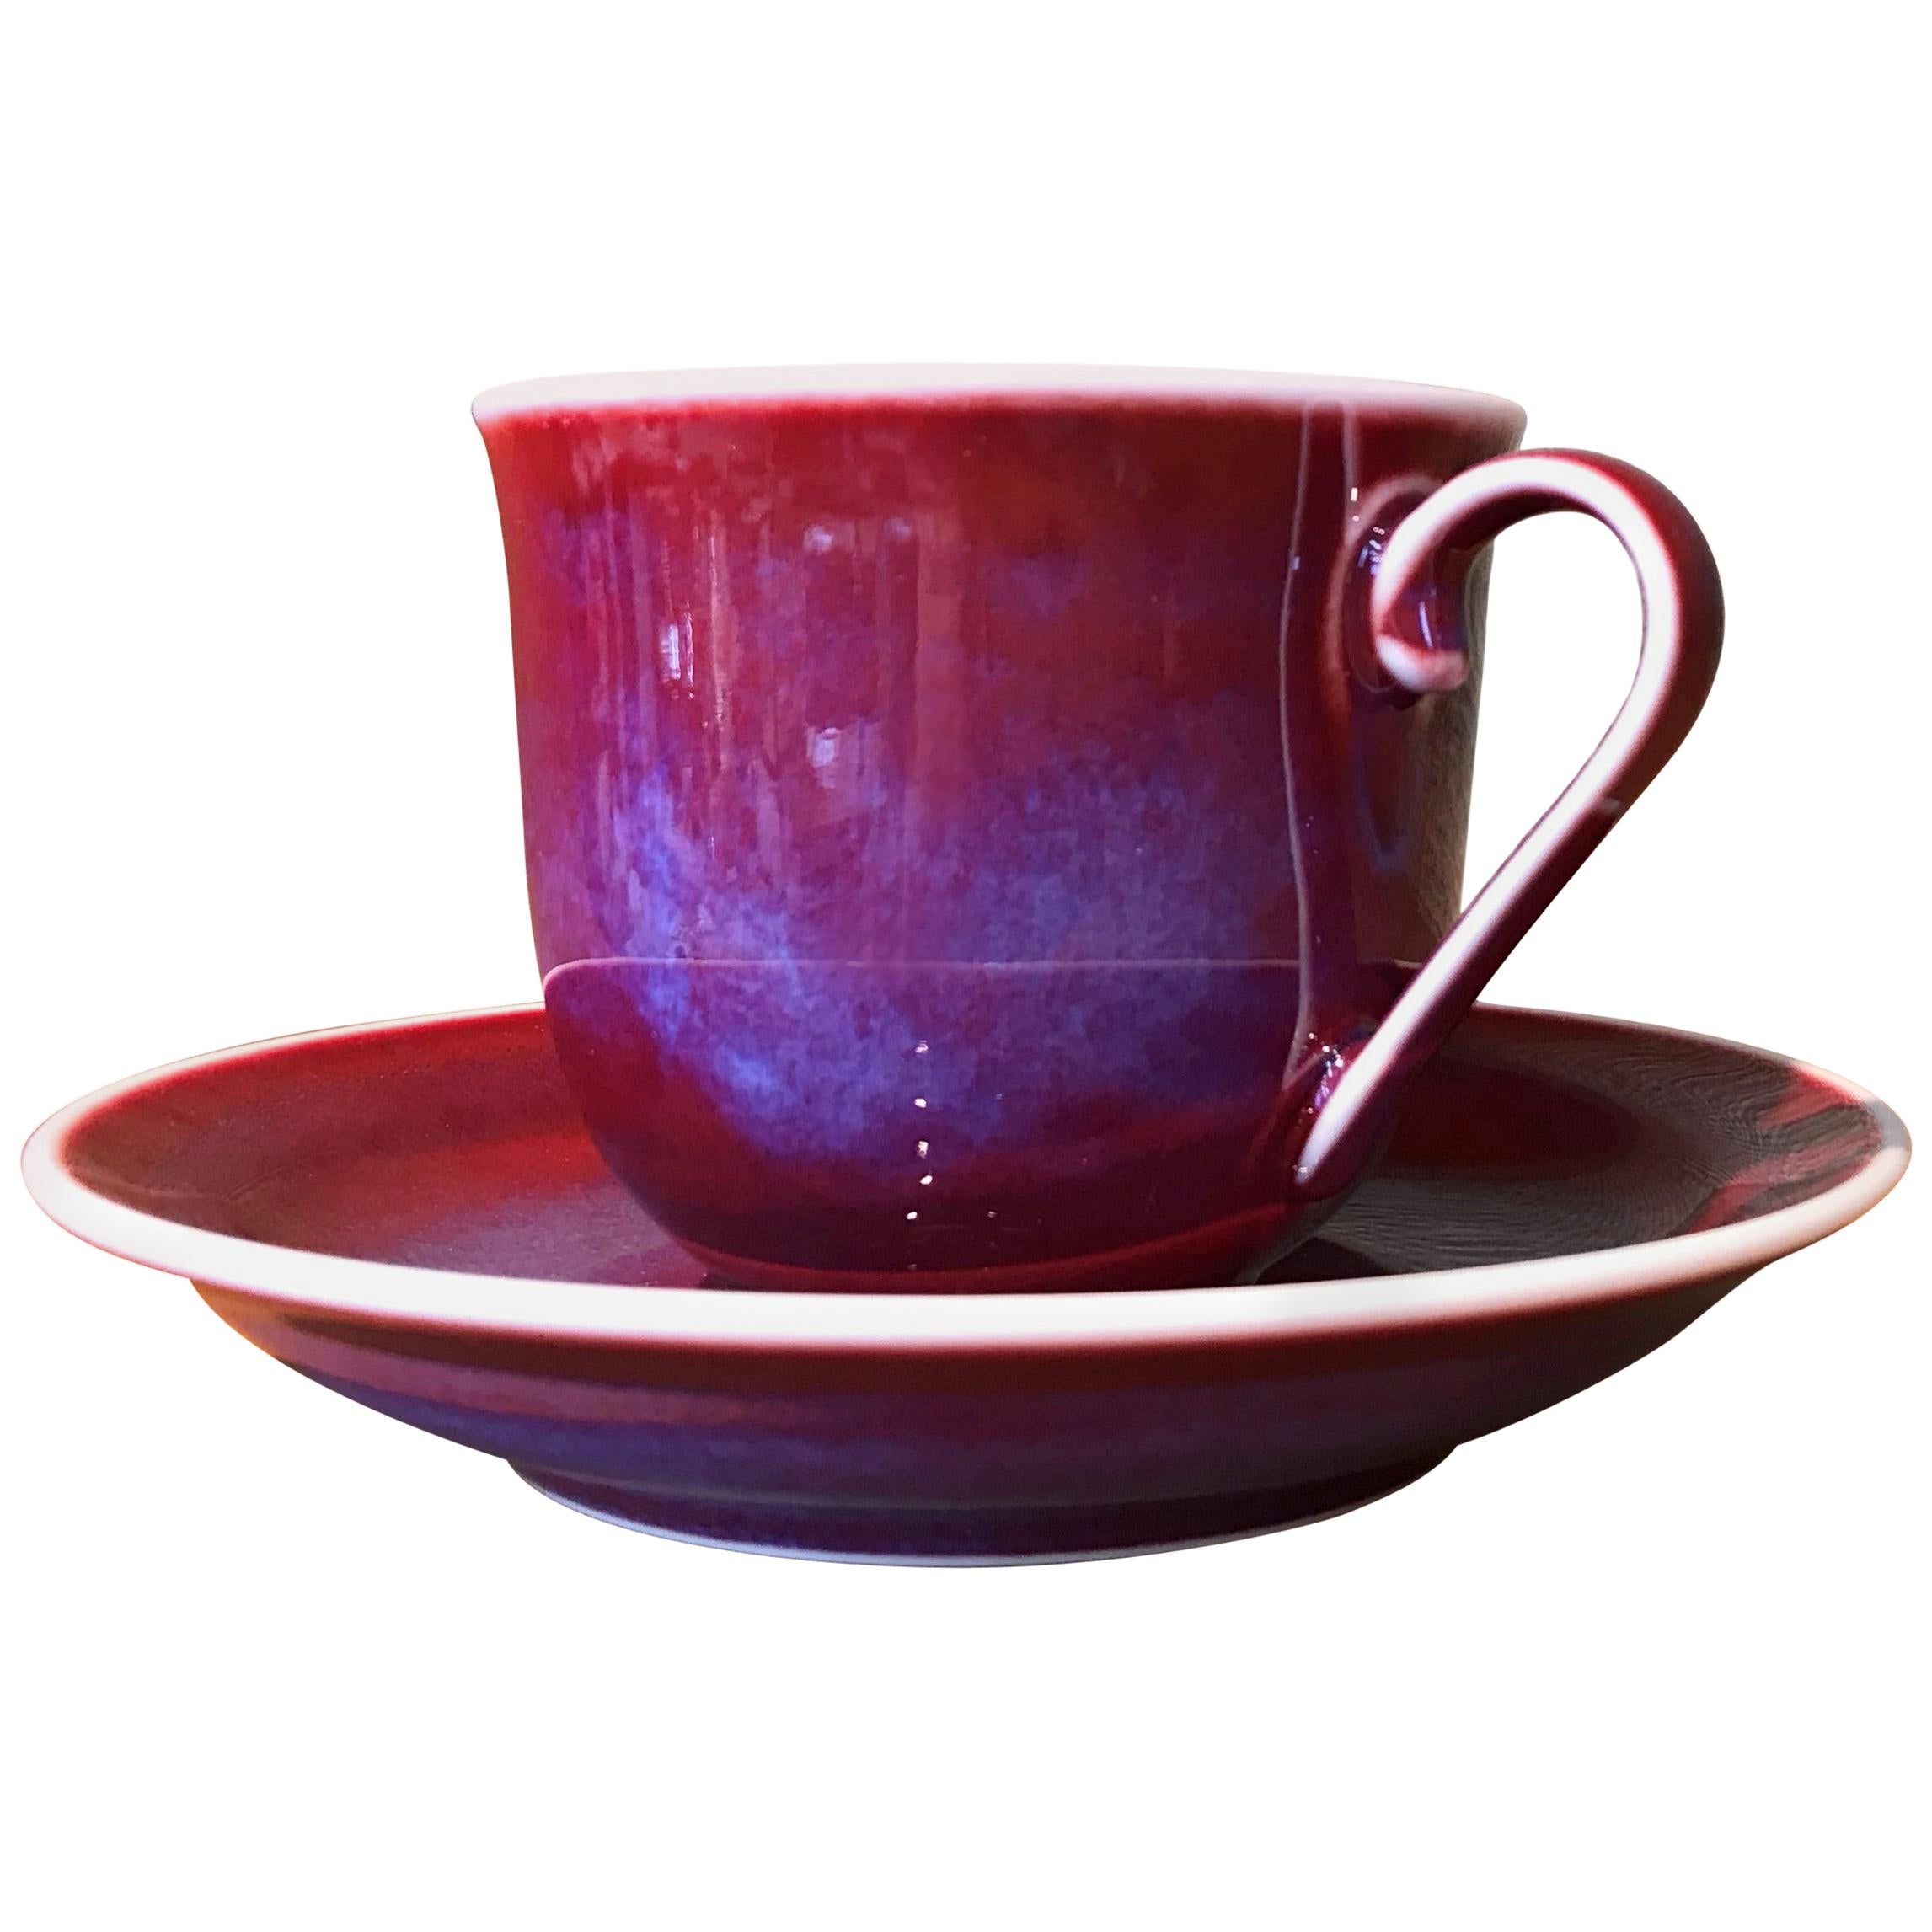 Japanese Hand-Glazed Red Blue Porcelain Cup and Saucer by Master Artist, 2018